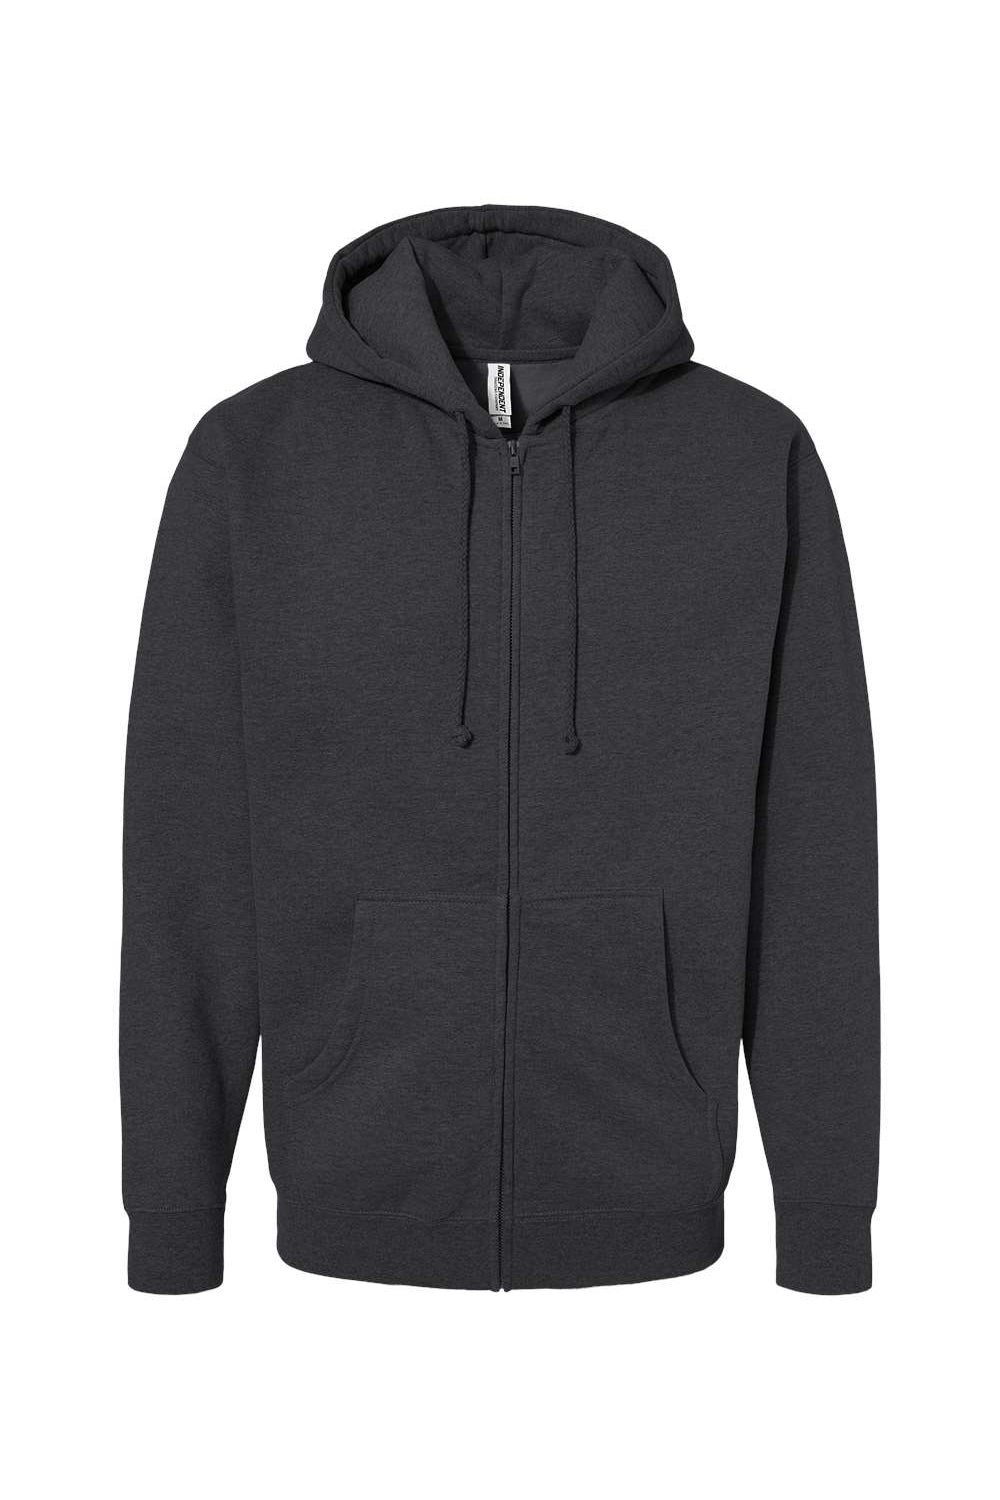 Independent Trading Co. IND4000Z Mens Full Zip Hooded Sweatshirt Hoodie Heather Charcoal Grey Flat Front